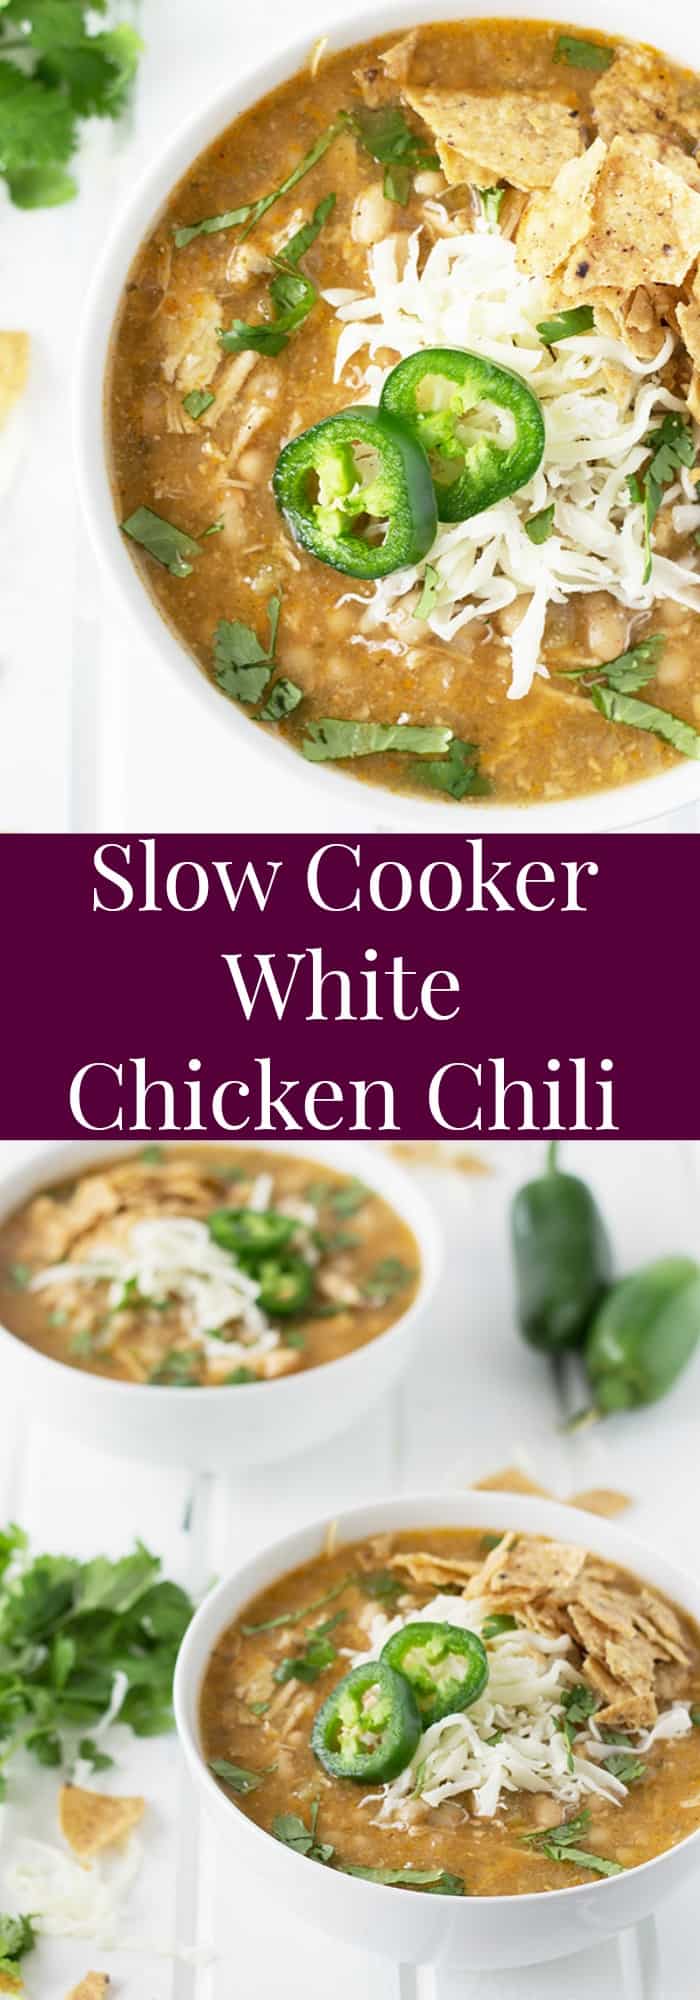 Slow Cooker White Chicken Chili with text overlay